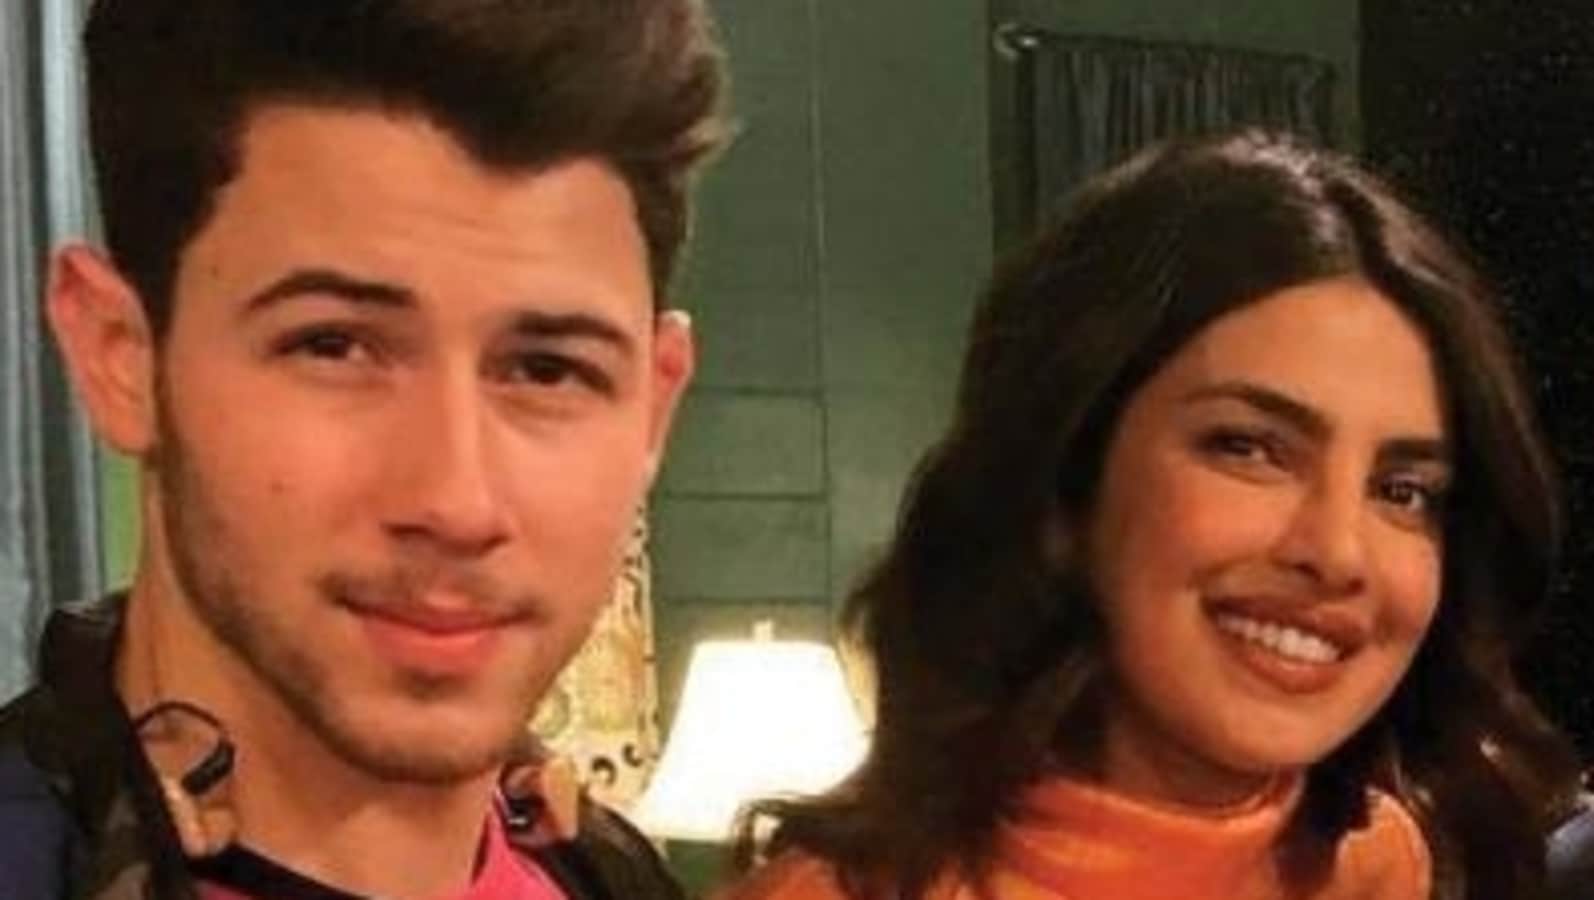 Priyanka Chopra steps out in pink to cheer for Nick Jonas, fans call them ‘cuties’. See pics